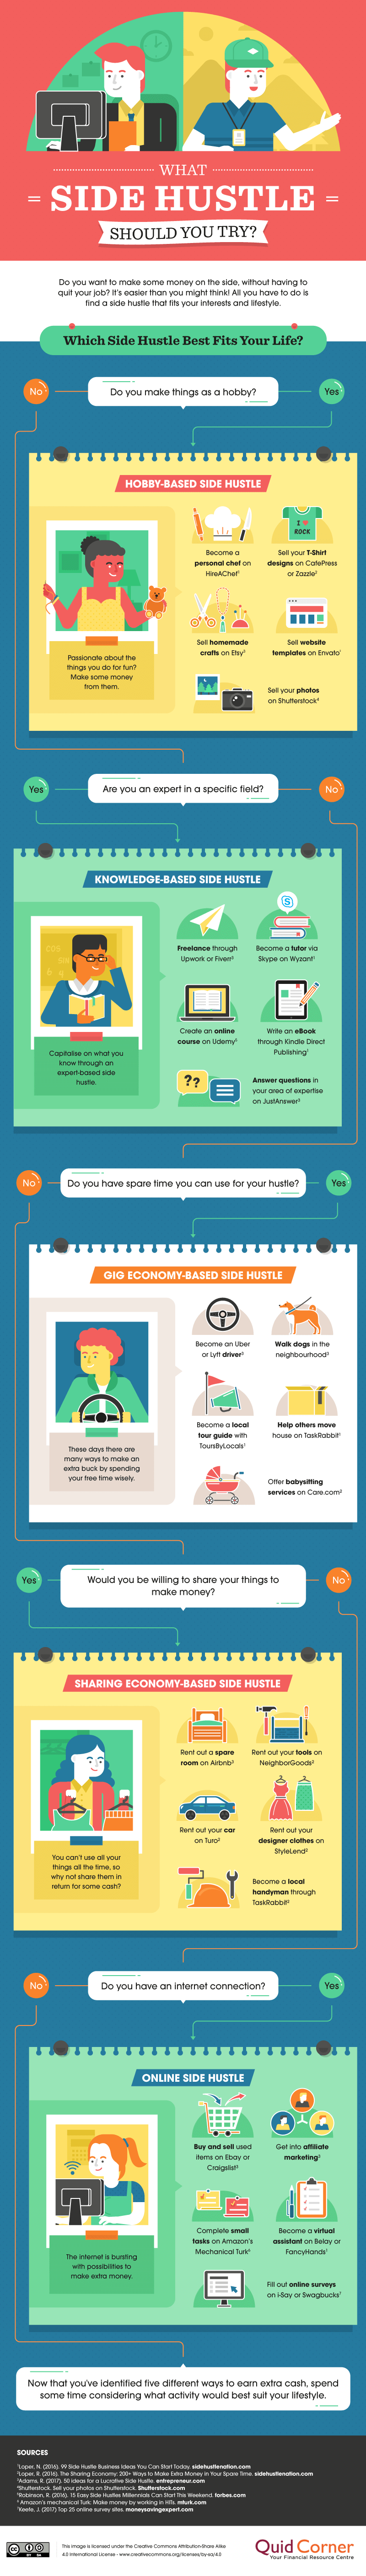 What Type of Side Hustle Should You Try? (Infographic)